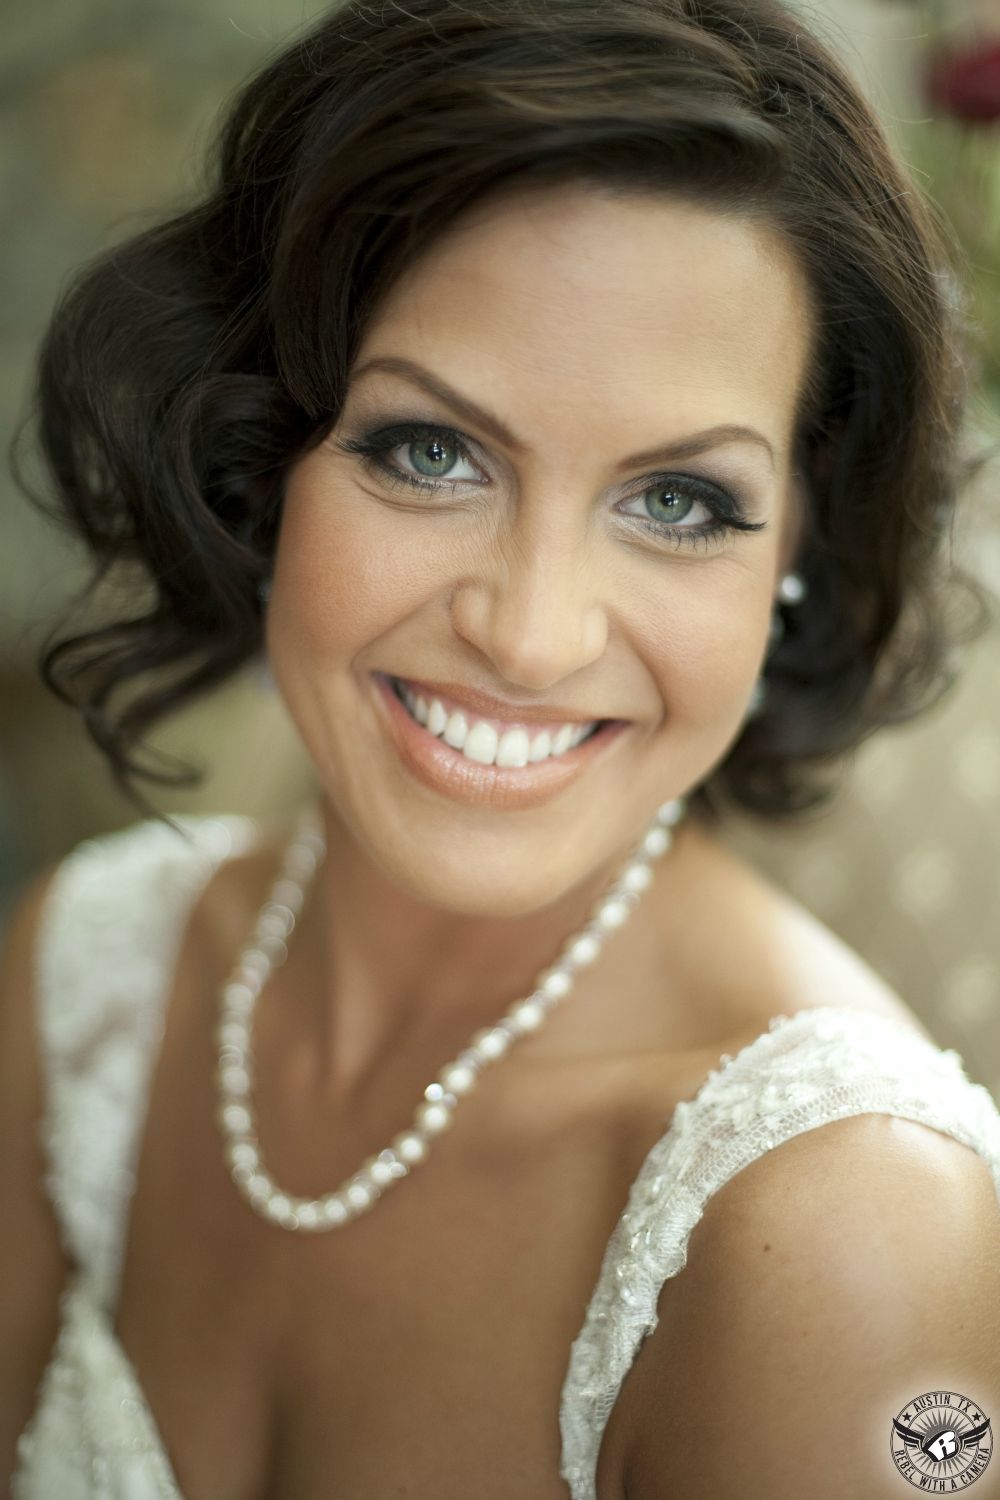 The gorgeous Lindsay Blackwell, owner of In Her Shoes Wedding Coordination Austin wedding planner, with makeup by Maris Malone Calderon at her own wedding in the bridal room at Nature's Point Austin wedding venue.